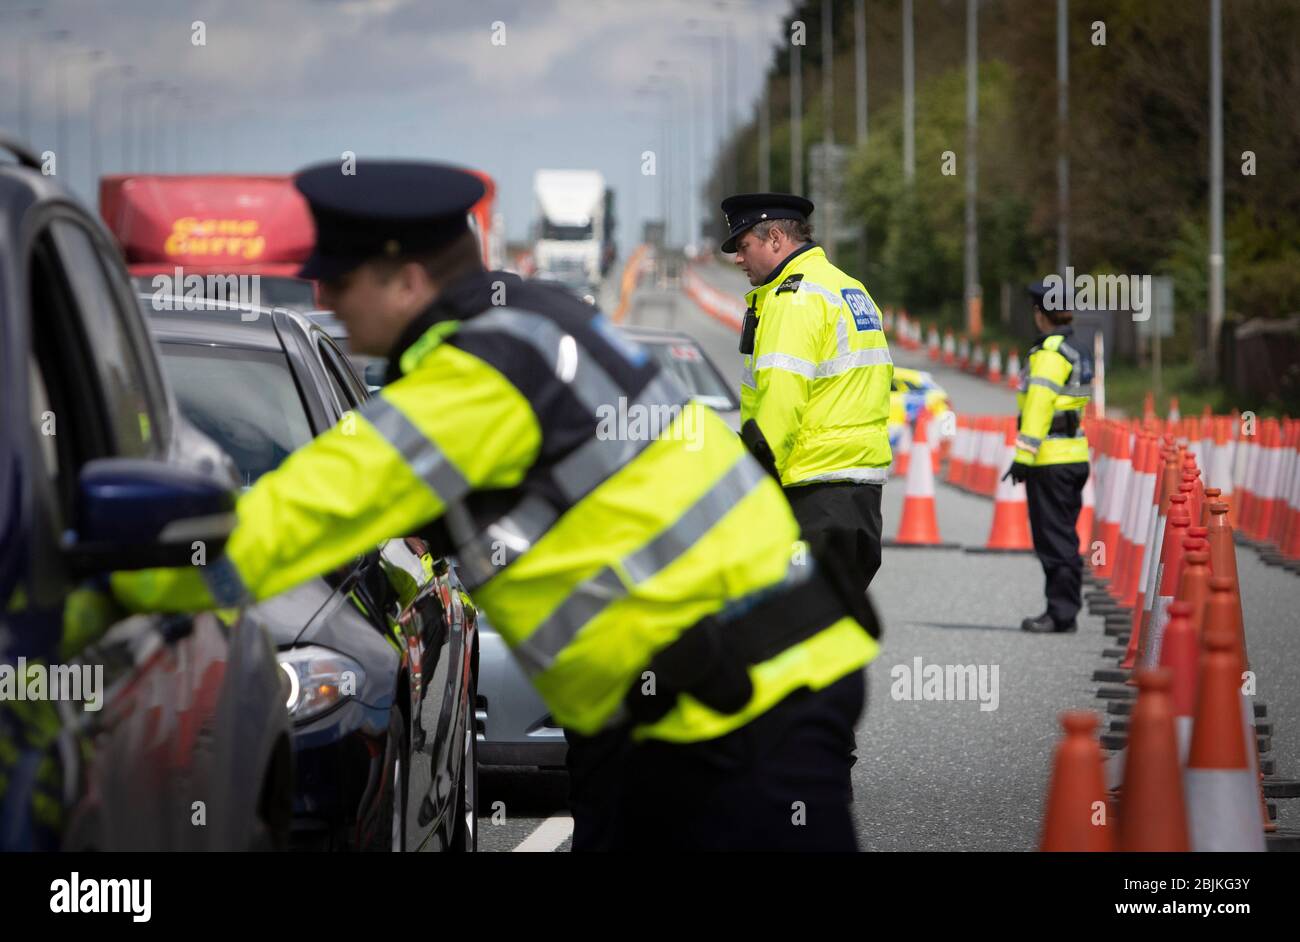 Dublin, Ireland - April 29, 2020: Garda Covid-19 checkpoint on the N7 motorway outside the city. Stock Photo